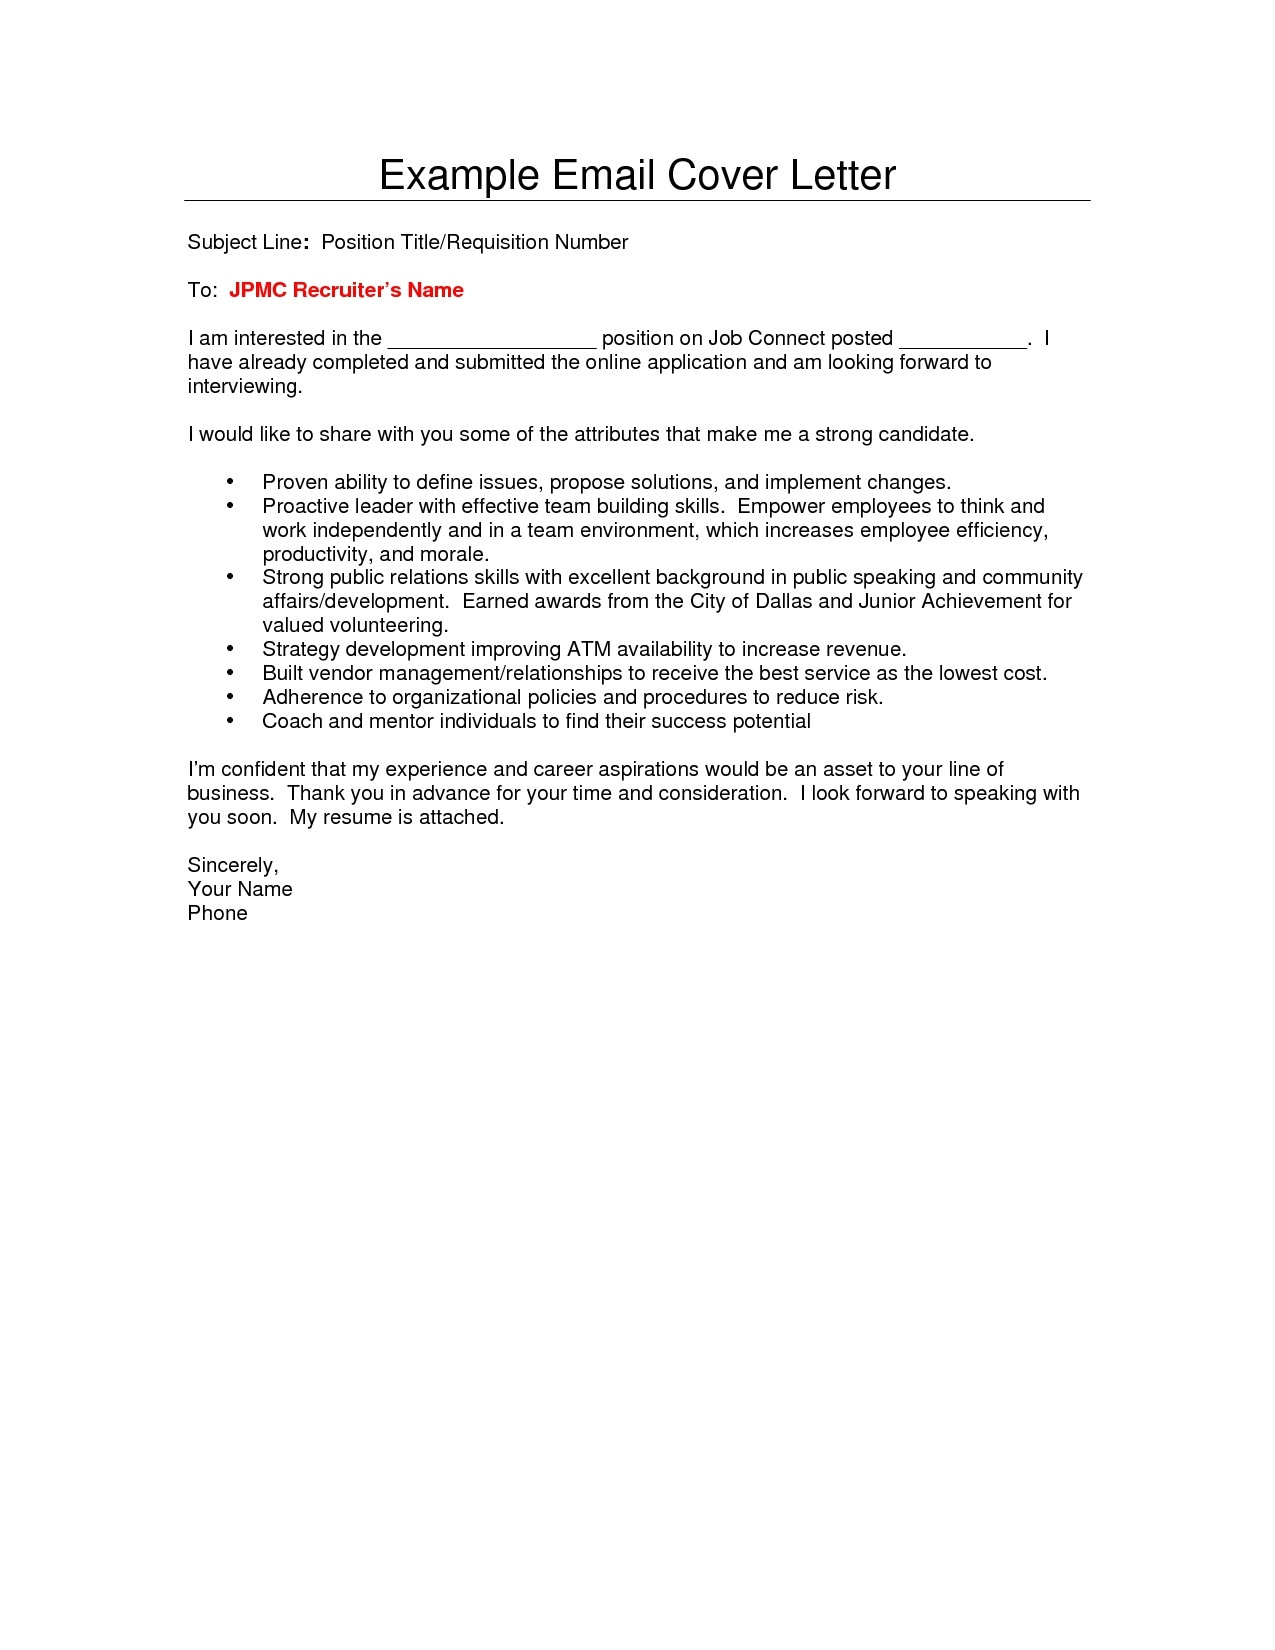 Candidate attorney Cover Letter Candidate attorney Cover Letter Sample tomyumtumweb Com